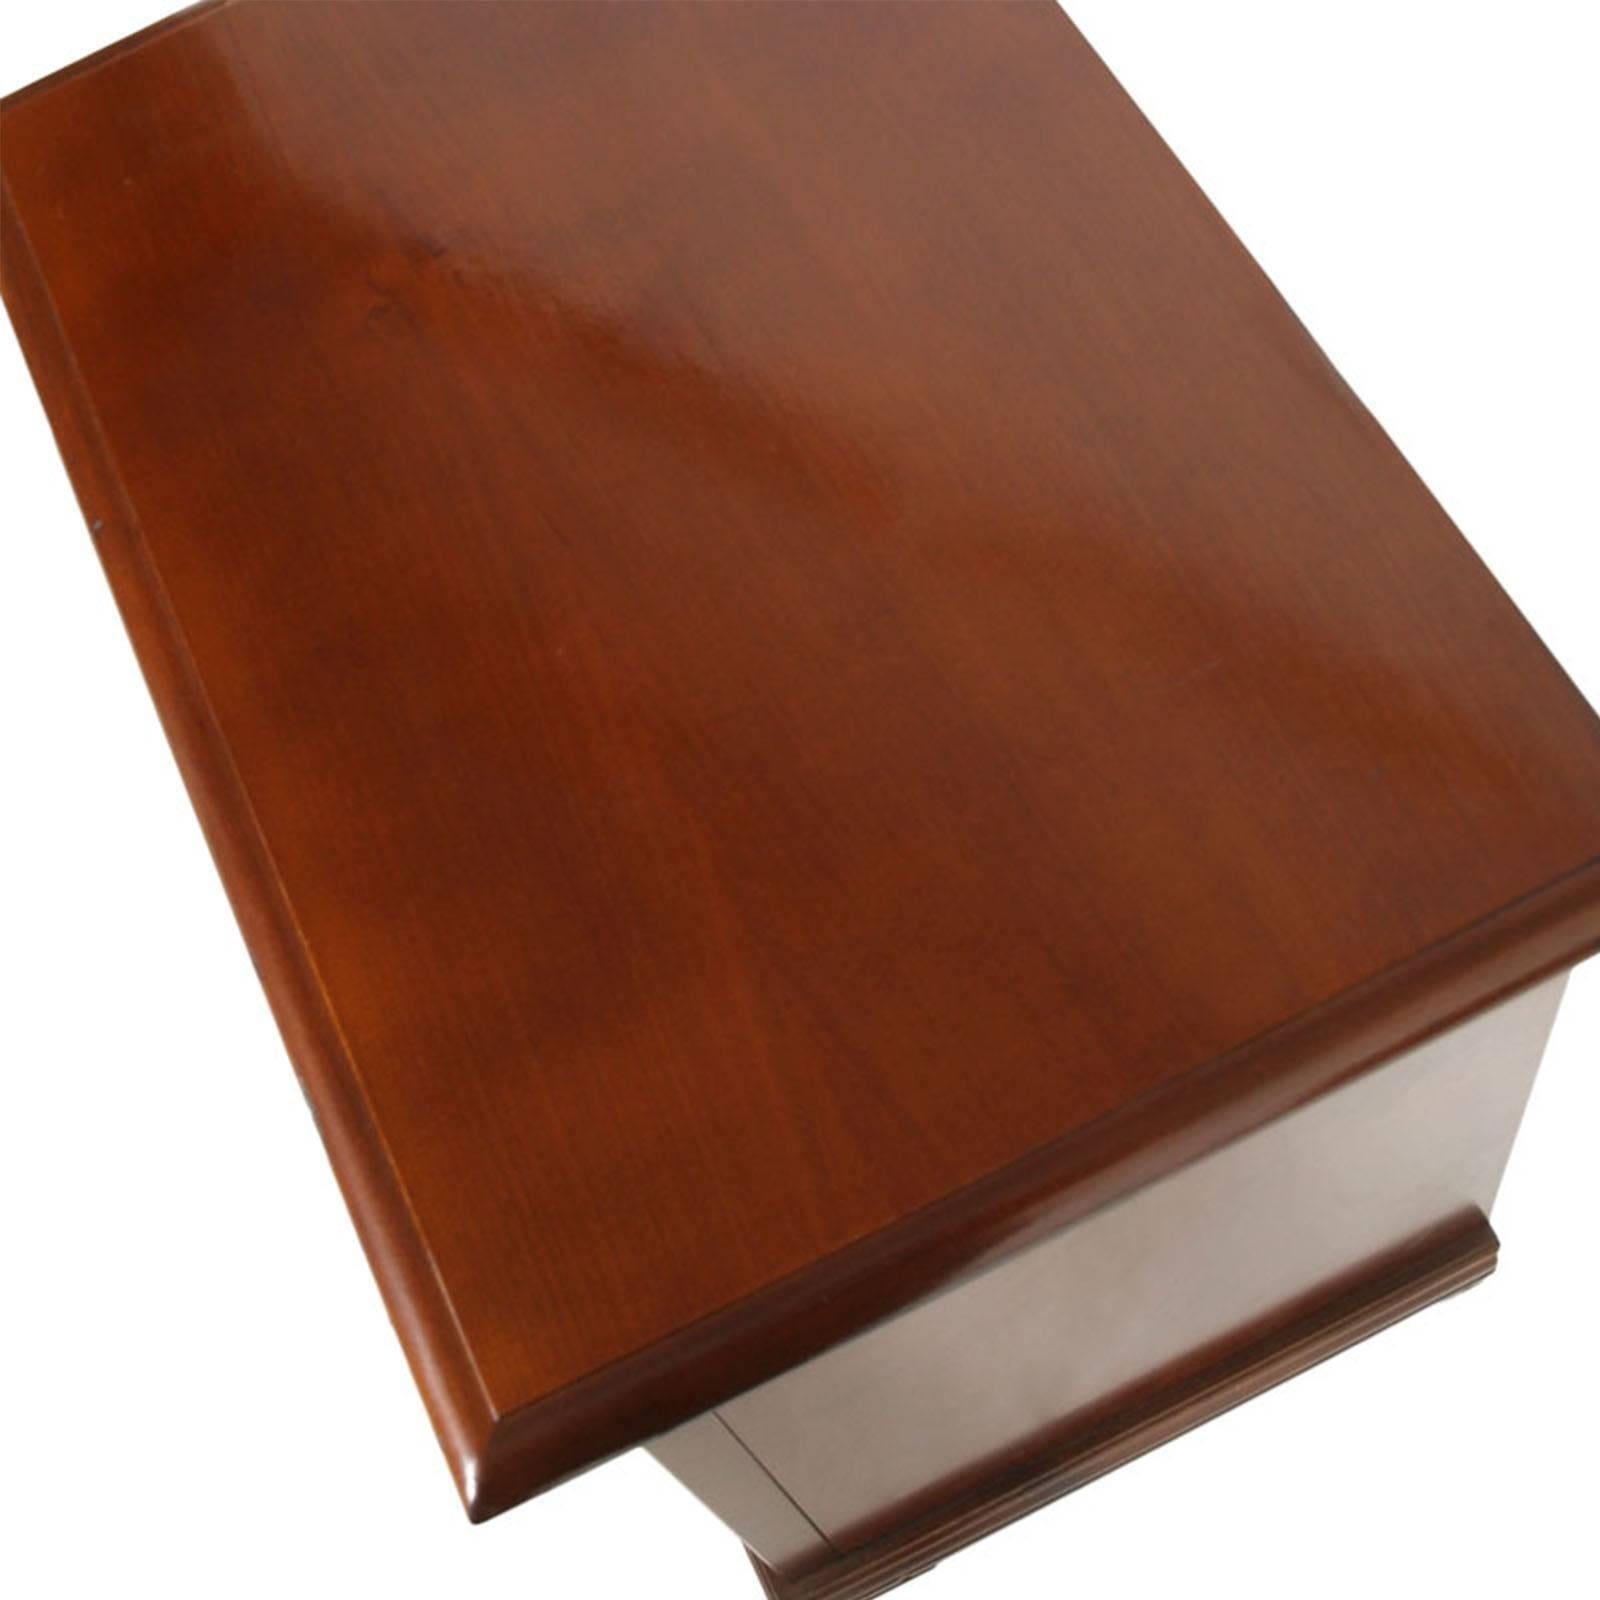 Italian Mid-20th Century Directoire Nightstand in Walnut, Restored and Polished to Wax For Sale